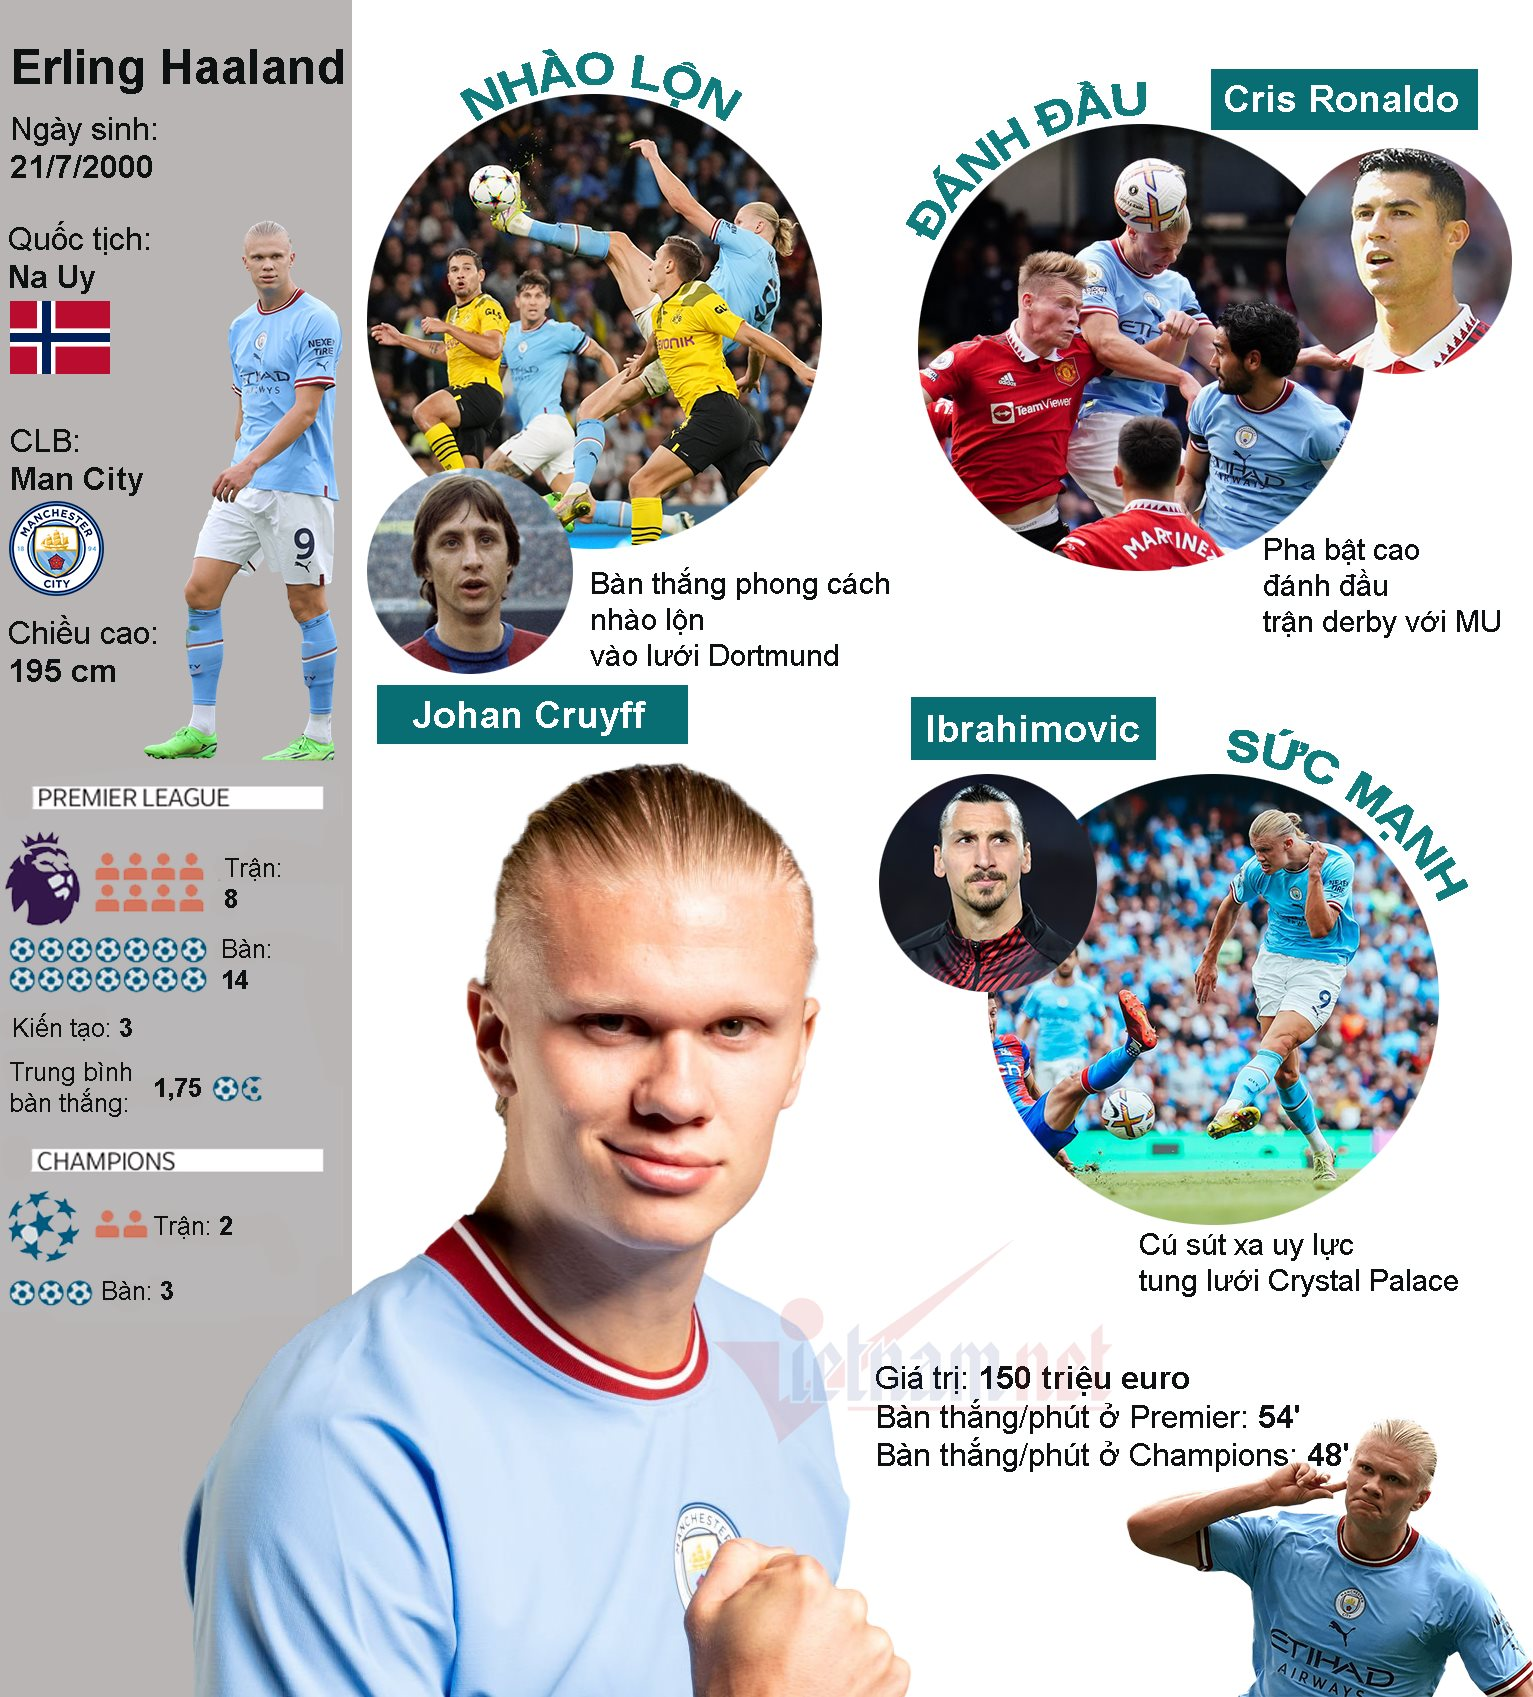 erling-haaland-infographic-926.png